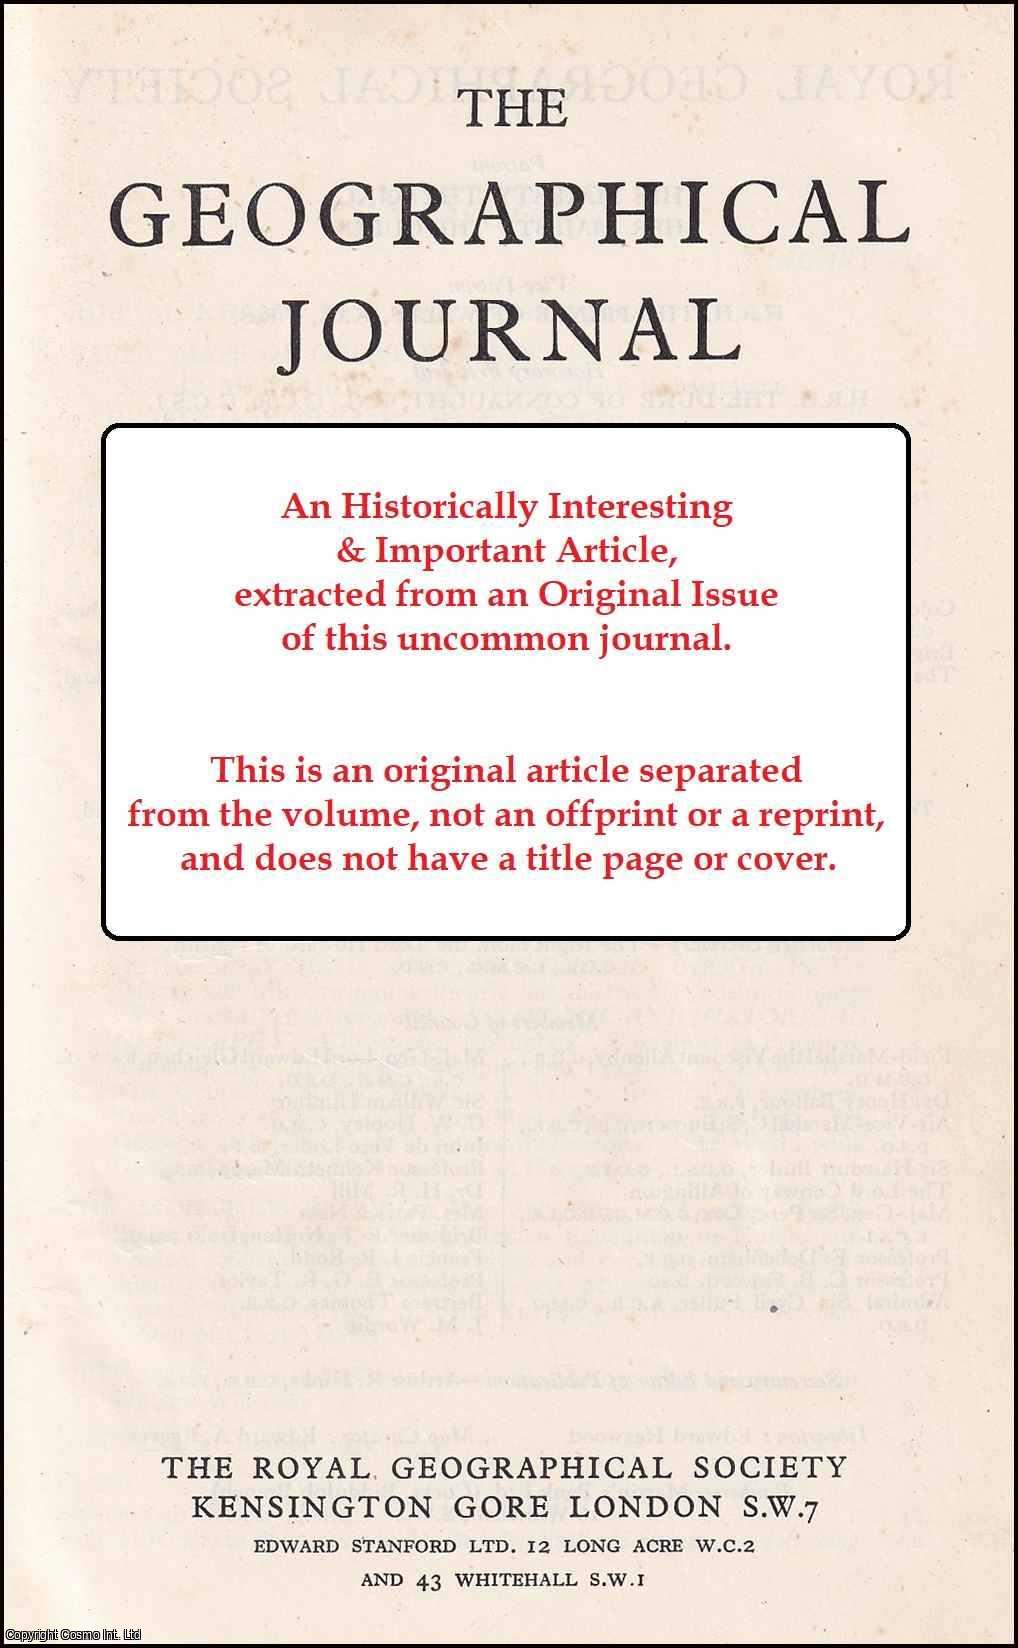 N. N. Ambraseys - A Test Case of Historical Seismicity: Isfahan and Chahar Mahal, Iran. An original article from the Geographical Journal, 1979.